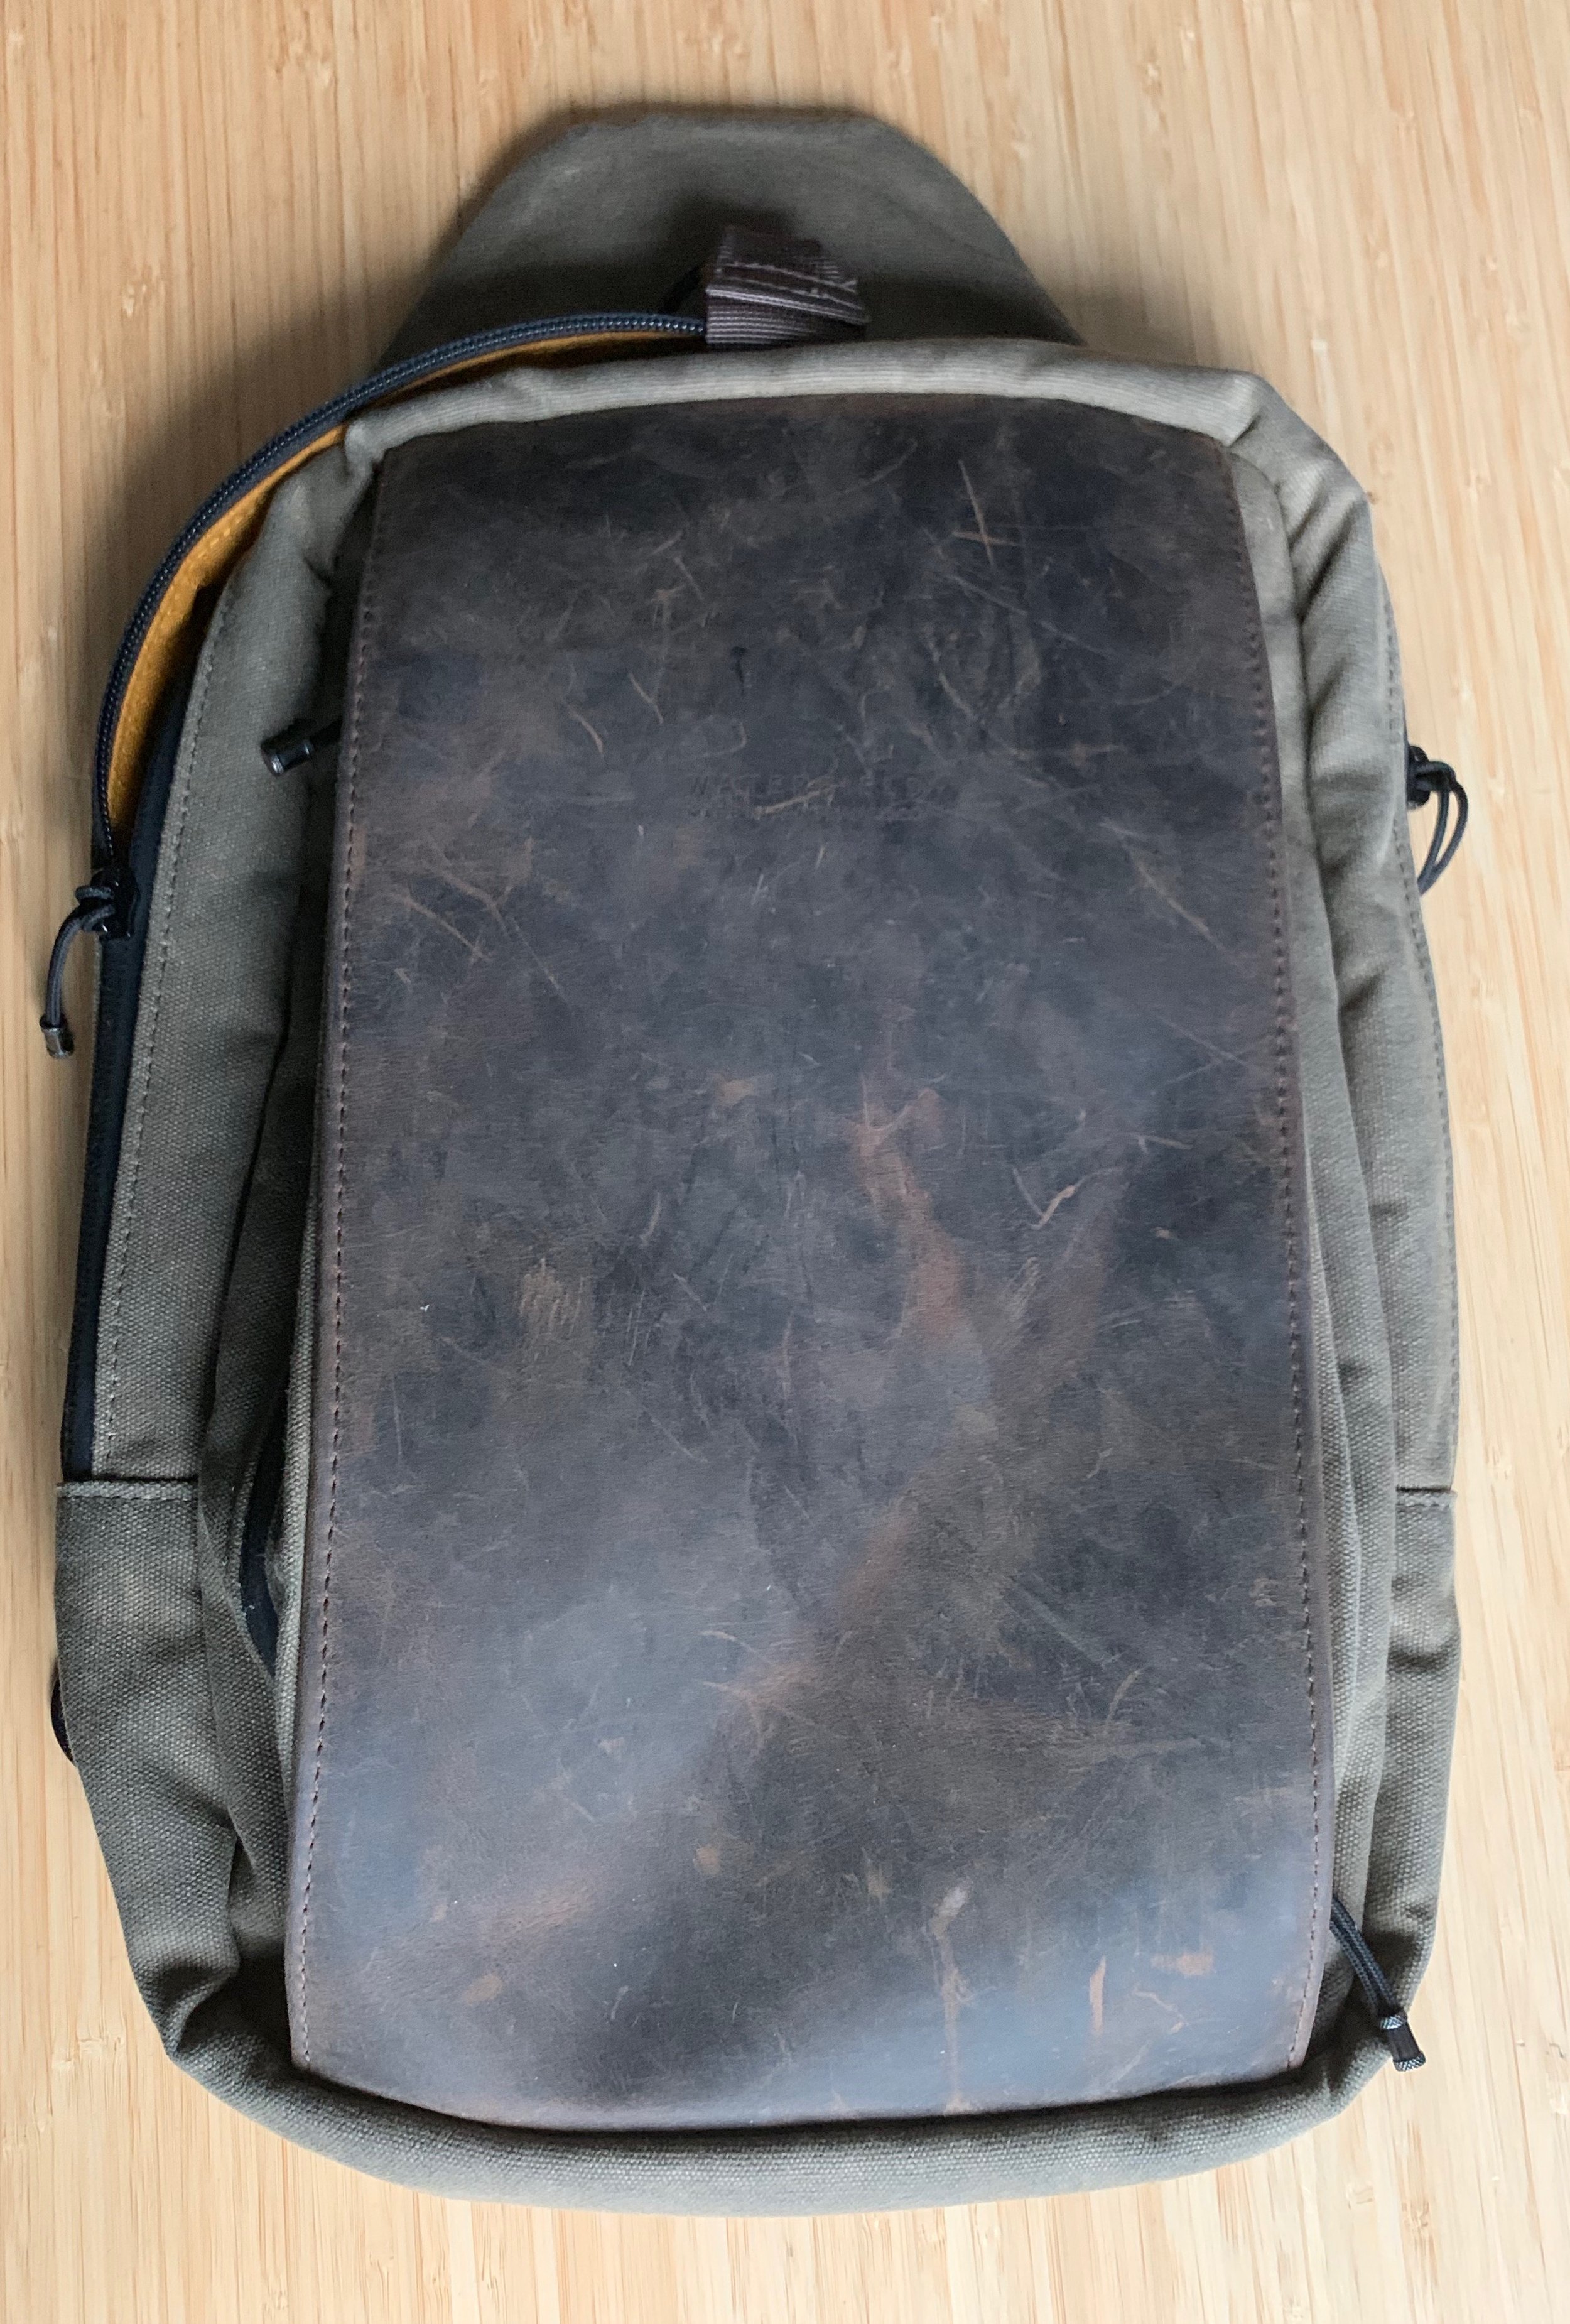 My well-loved Sutter Tech Sling. Click to enlarge.